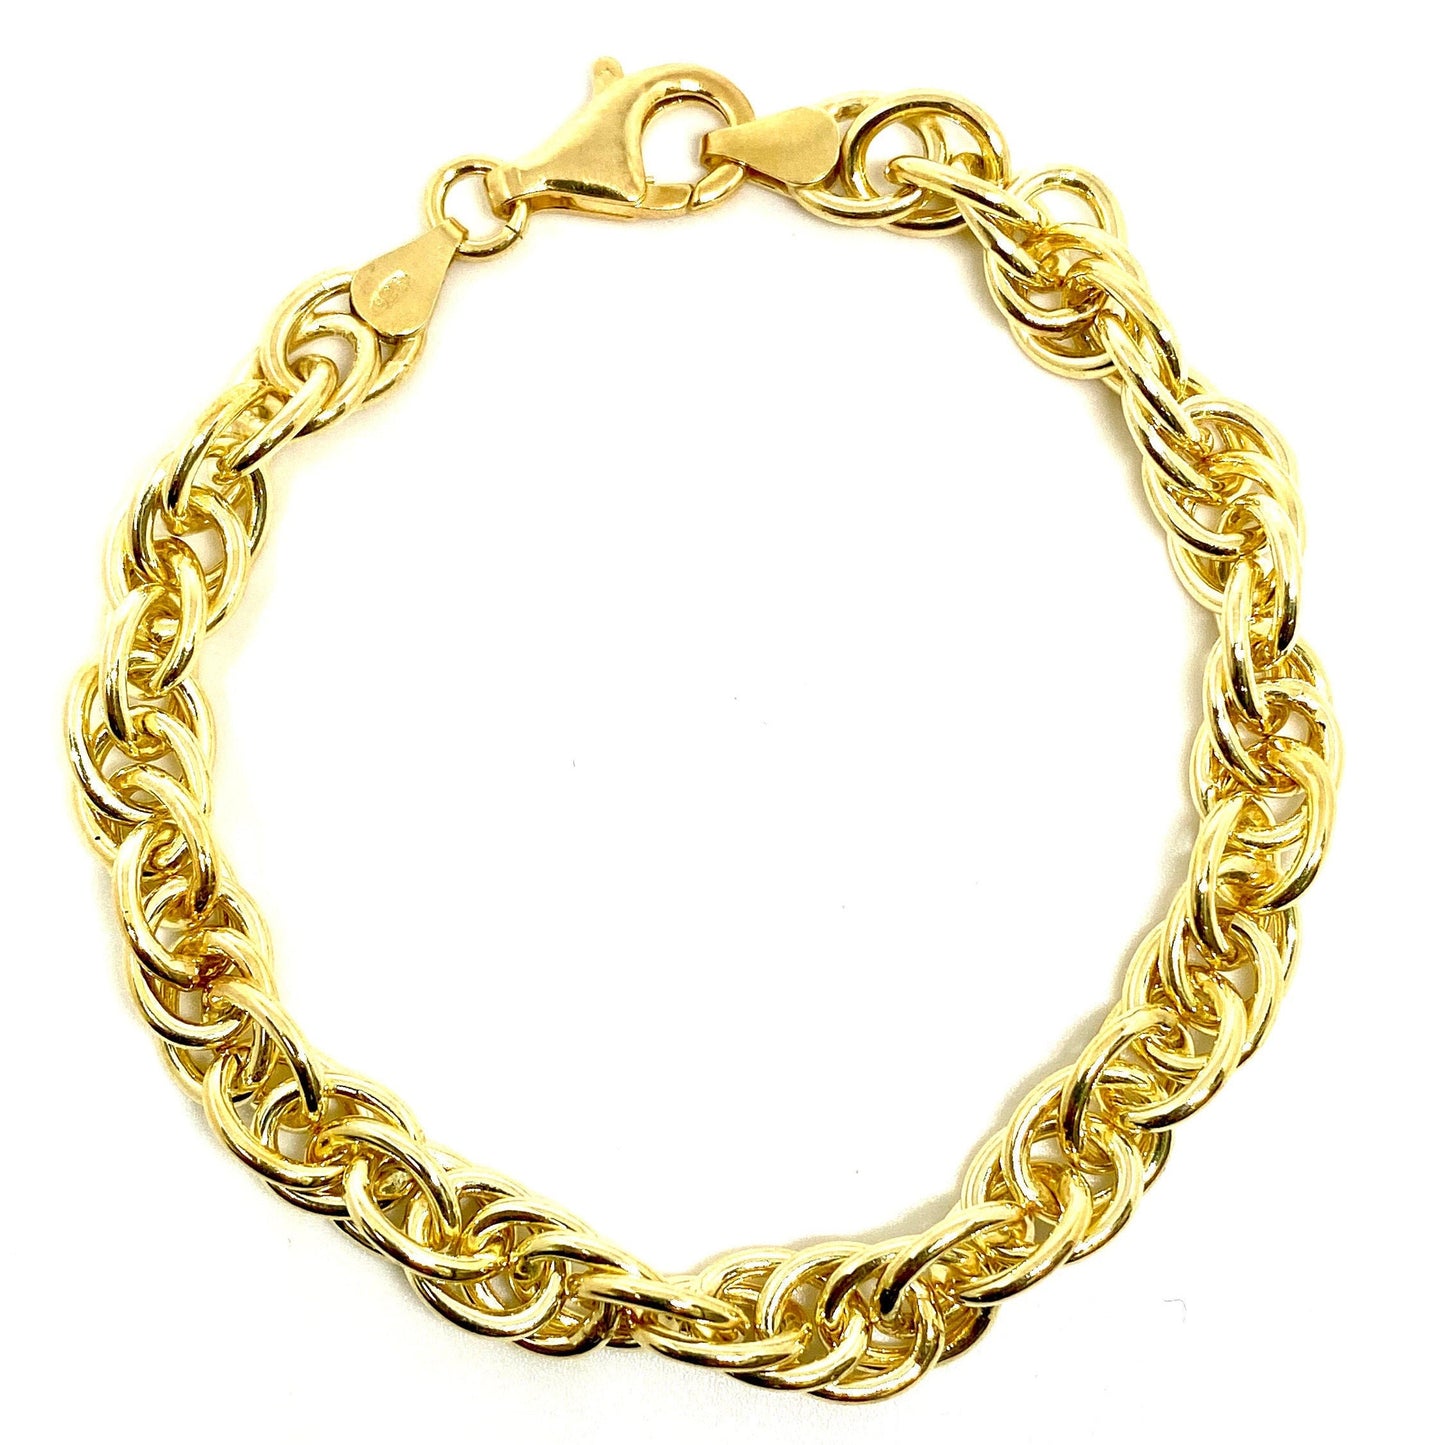 Yellow Gold Over Sterling Silver 8mm Oval Interlocking Rings Link Bracelet